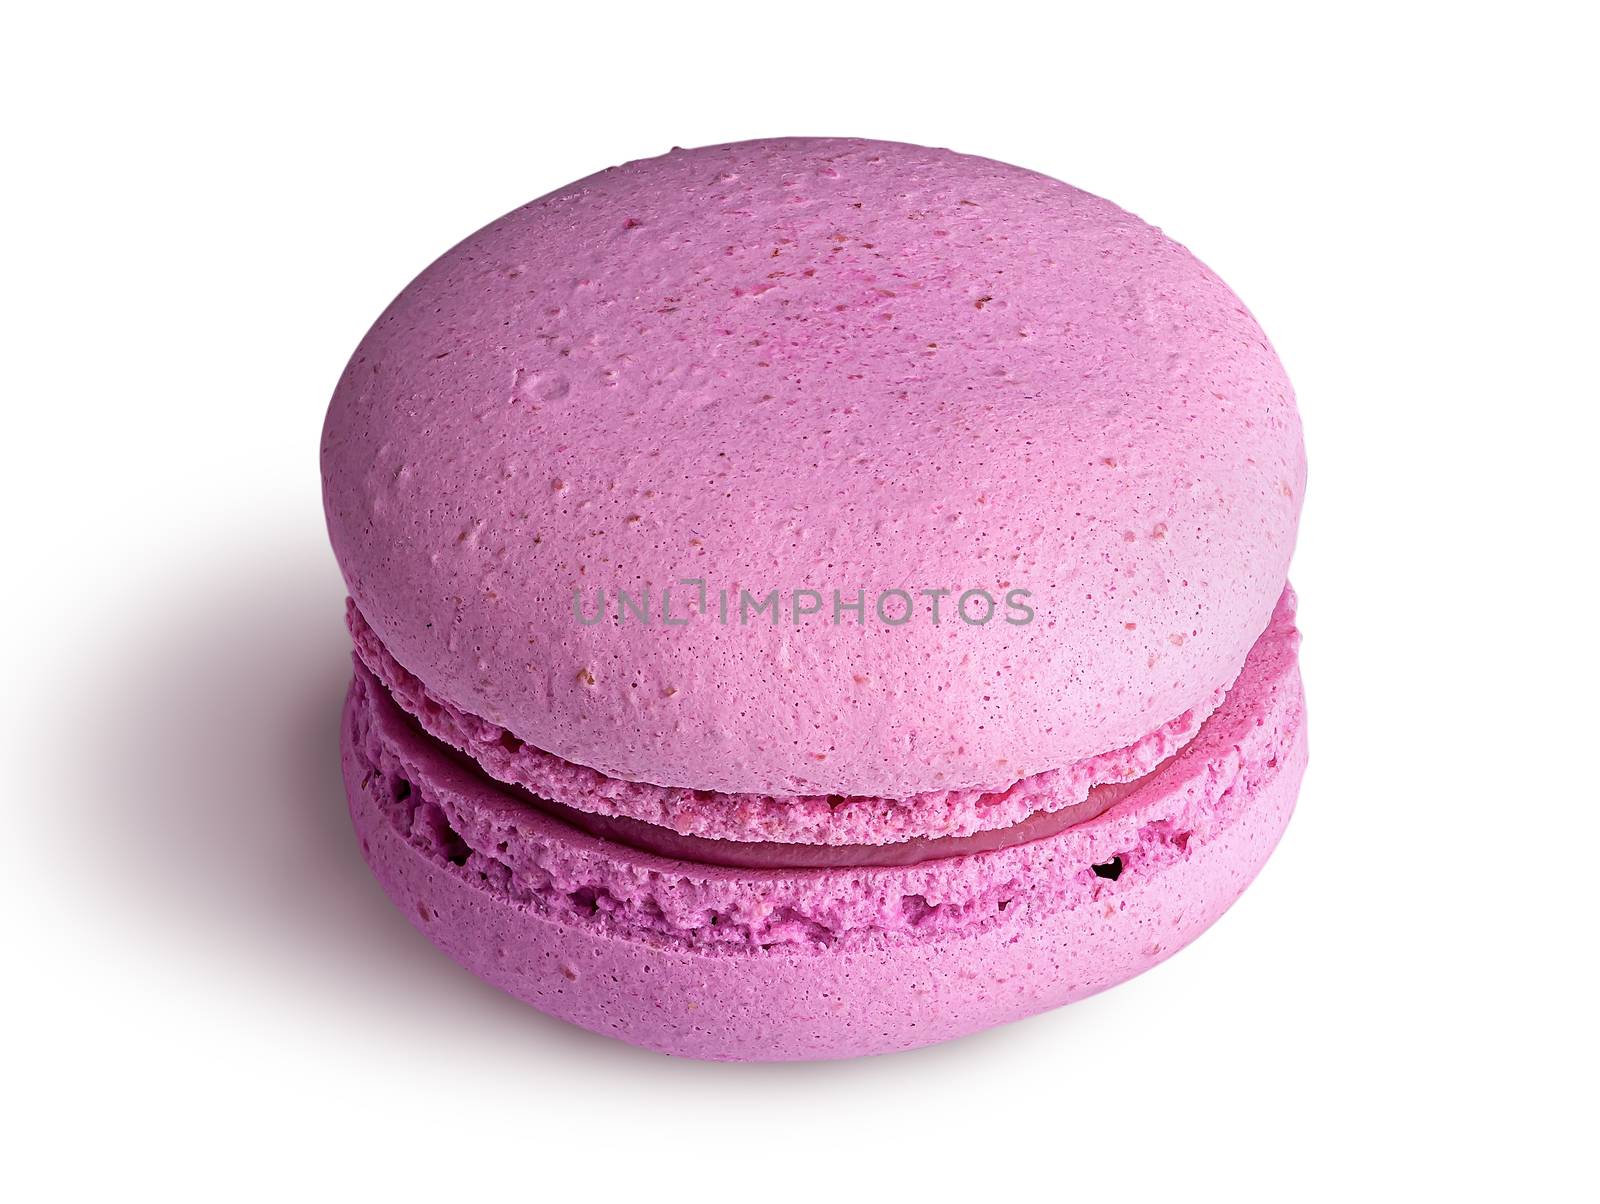 One pink macaroon angled view isolated on a white background